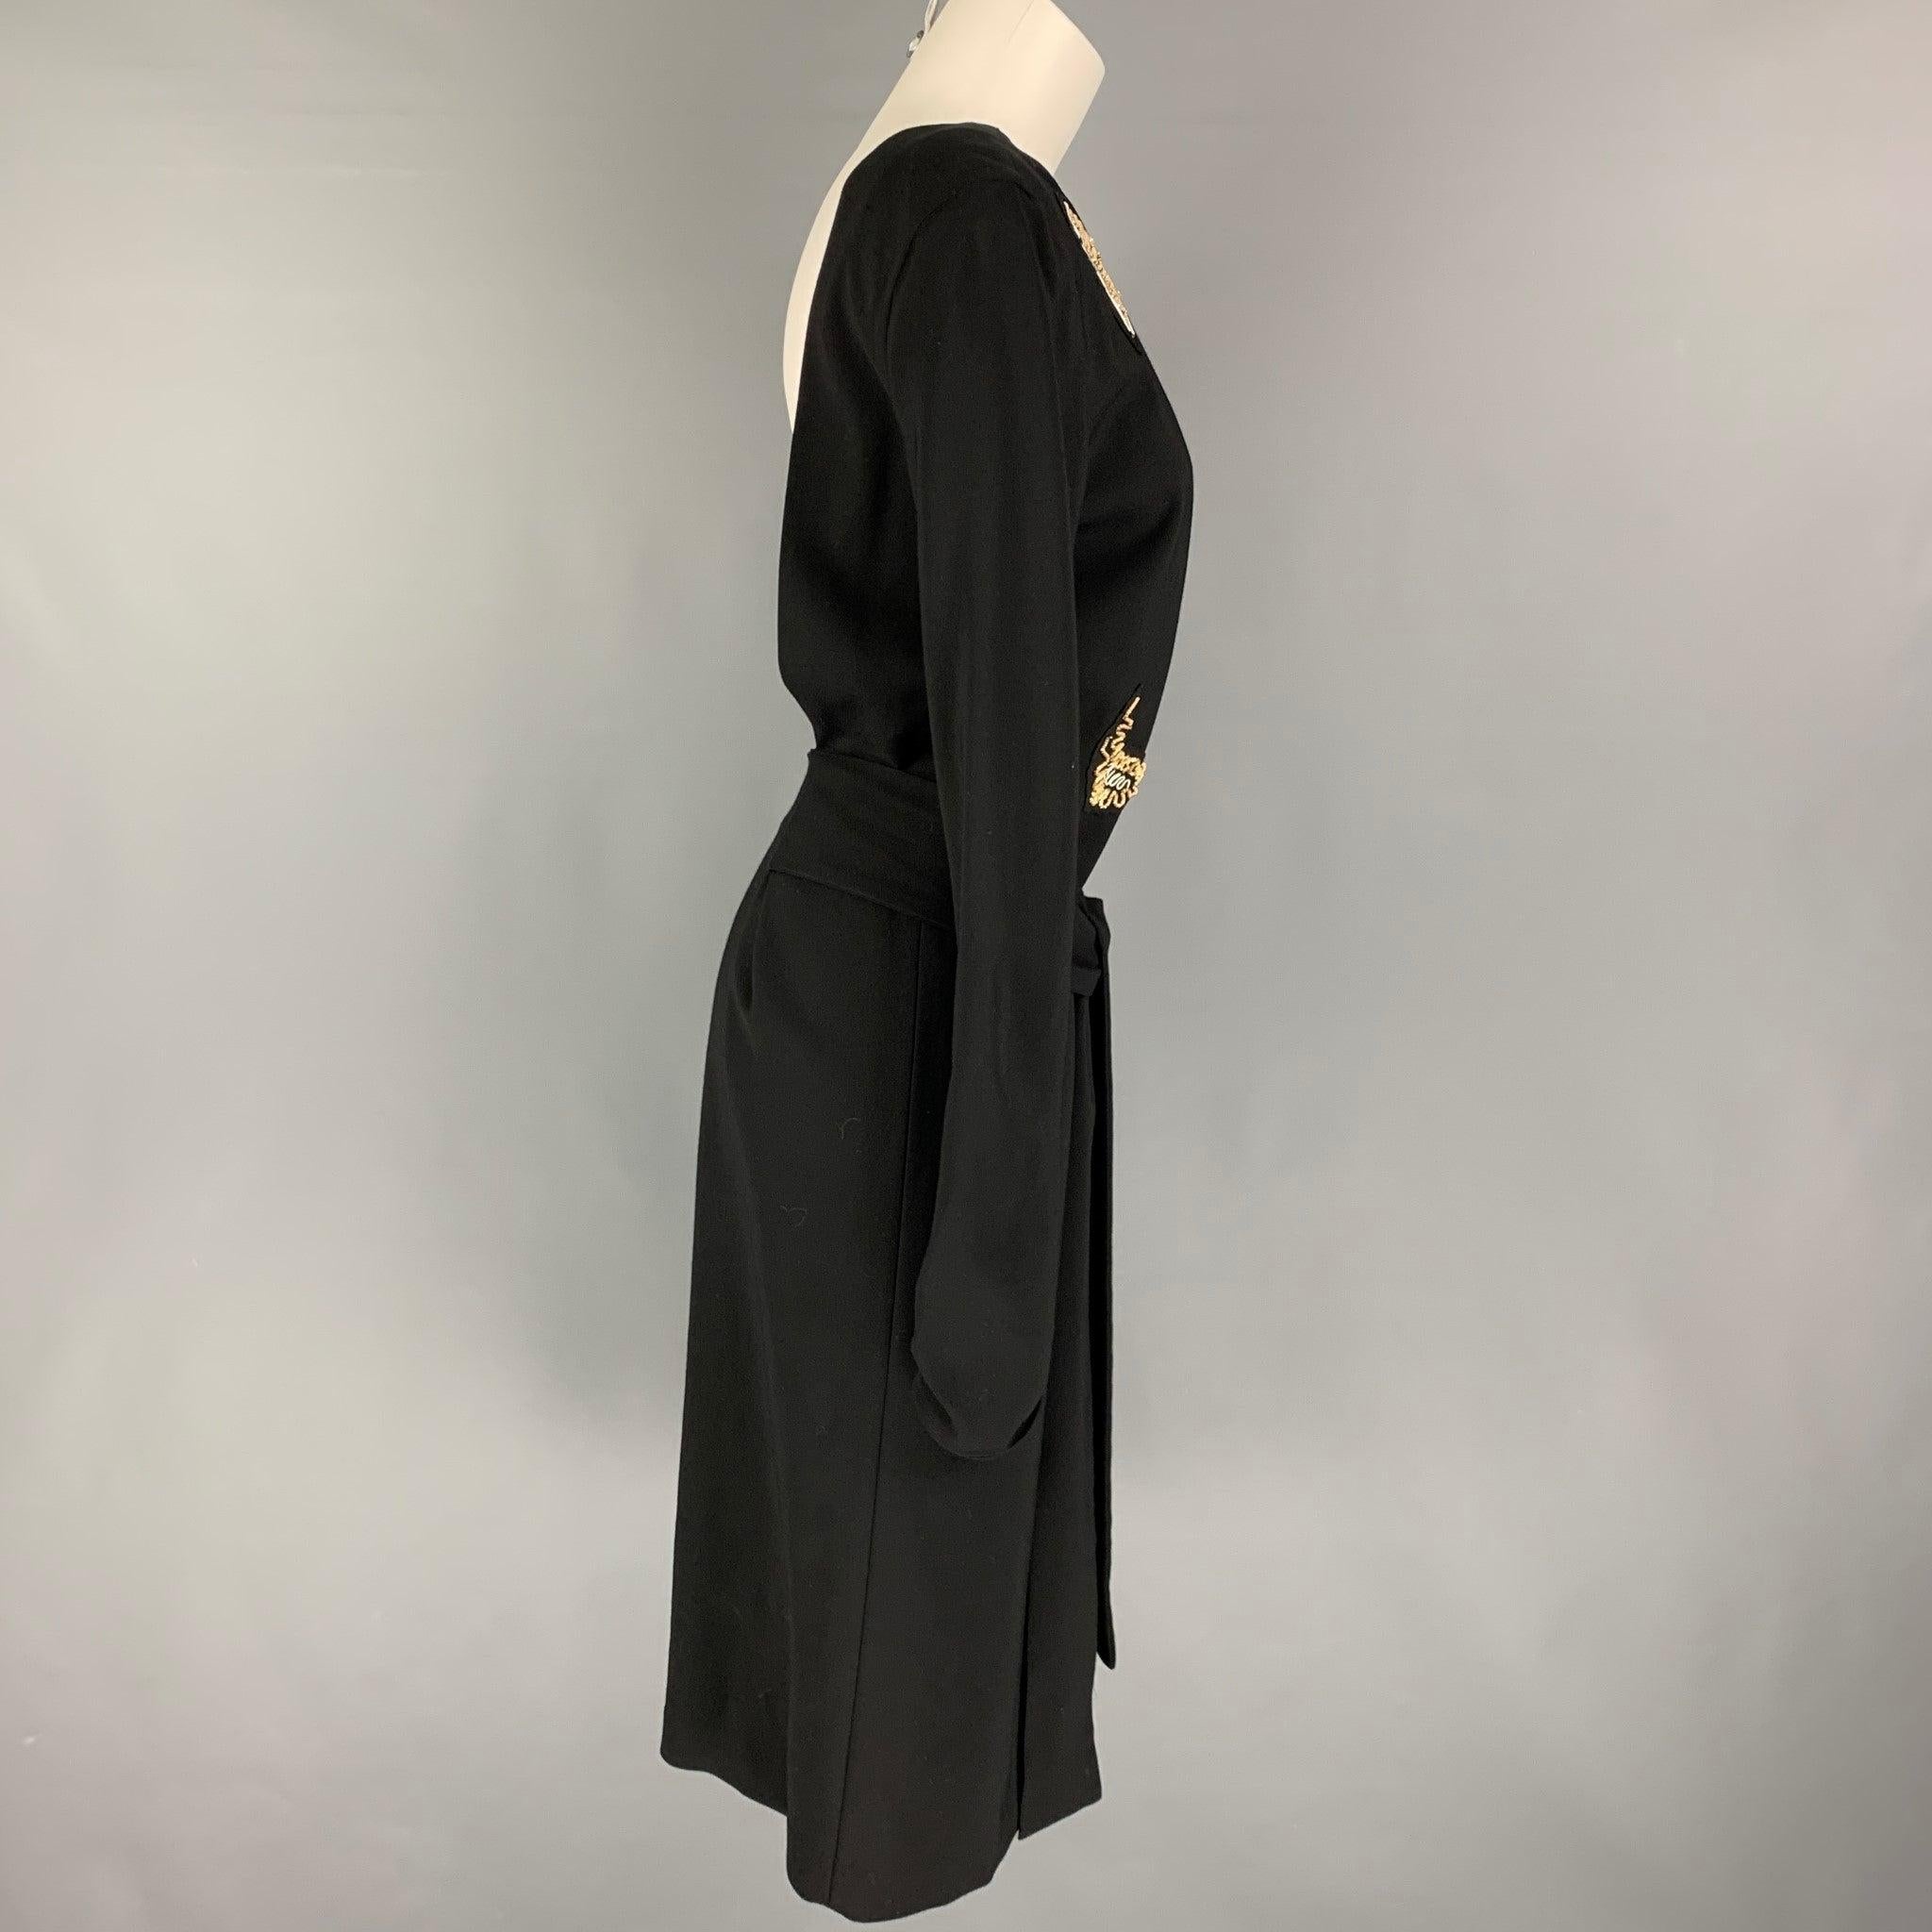 PAUL SMITH dress comes in a black viscose featuring a open back, sequined patches, and a front self tie detail.
Very Good
Pre-Owned Condition. 

Marked:   40 

Measurements: 
 
Shoulder: 16 inches  Bust: 34 inches Waist: 33 inches  Hip: 37 inches 